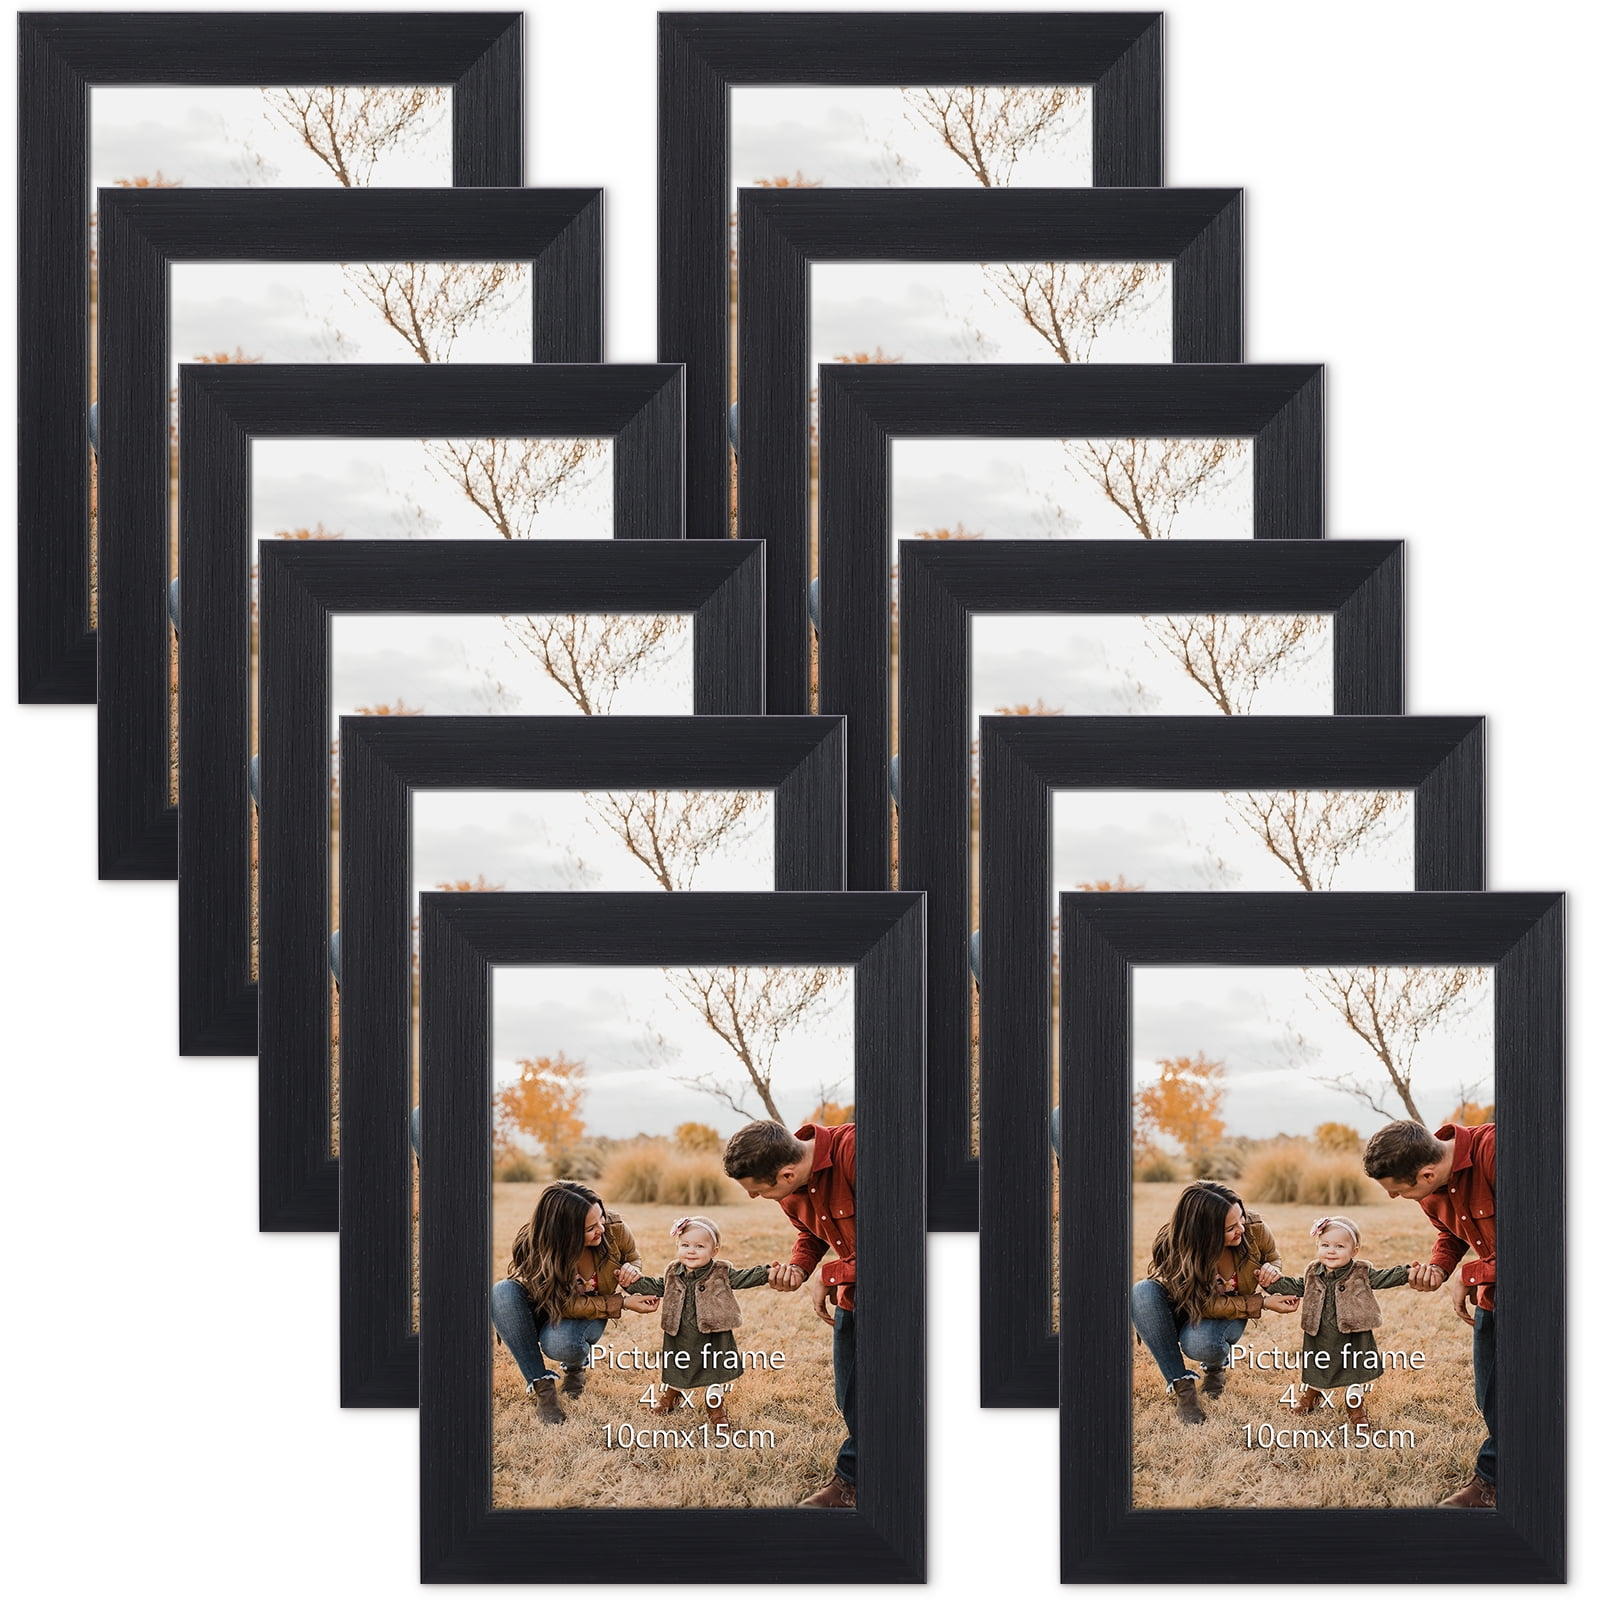 Art Street Primo wall photo frame Set of 11 Black Picture Frames (Black_6  Unit 4X6, 4 Units 5X7, 1 Unit 8X10 Inch, Black) : .in: Home & Kitchen